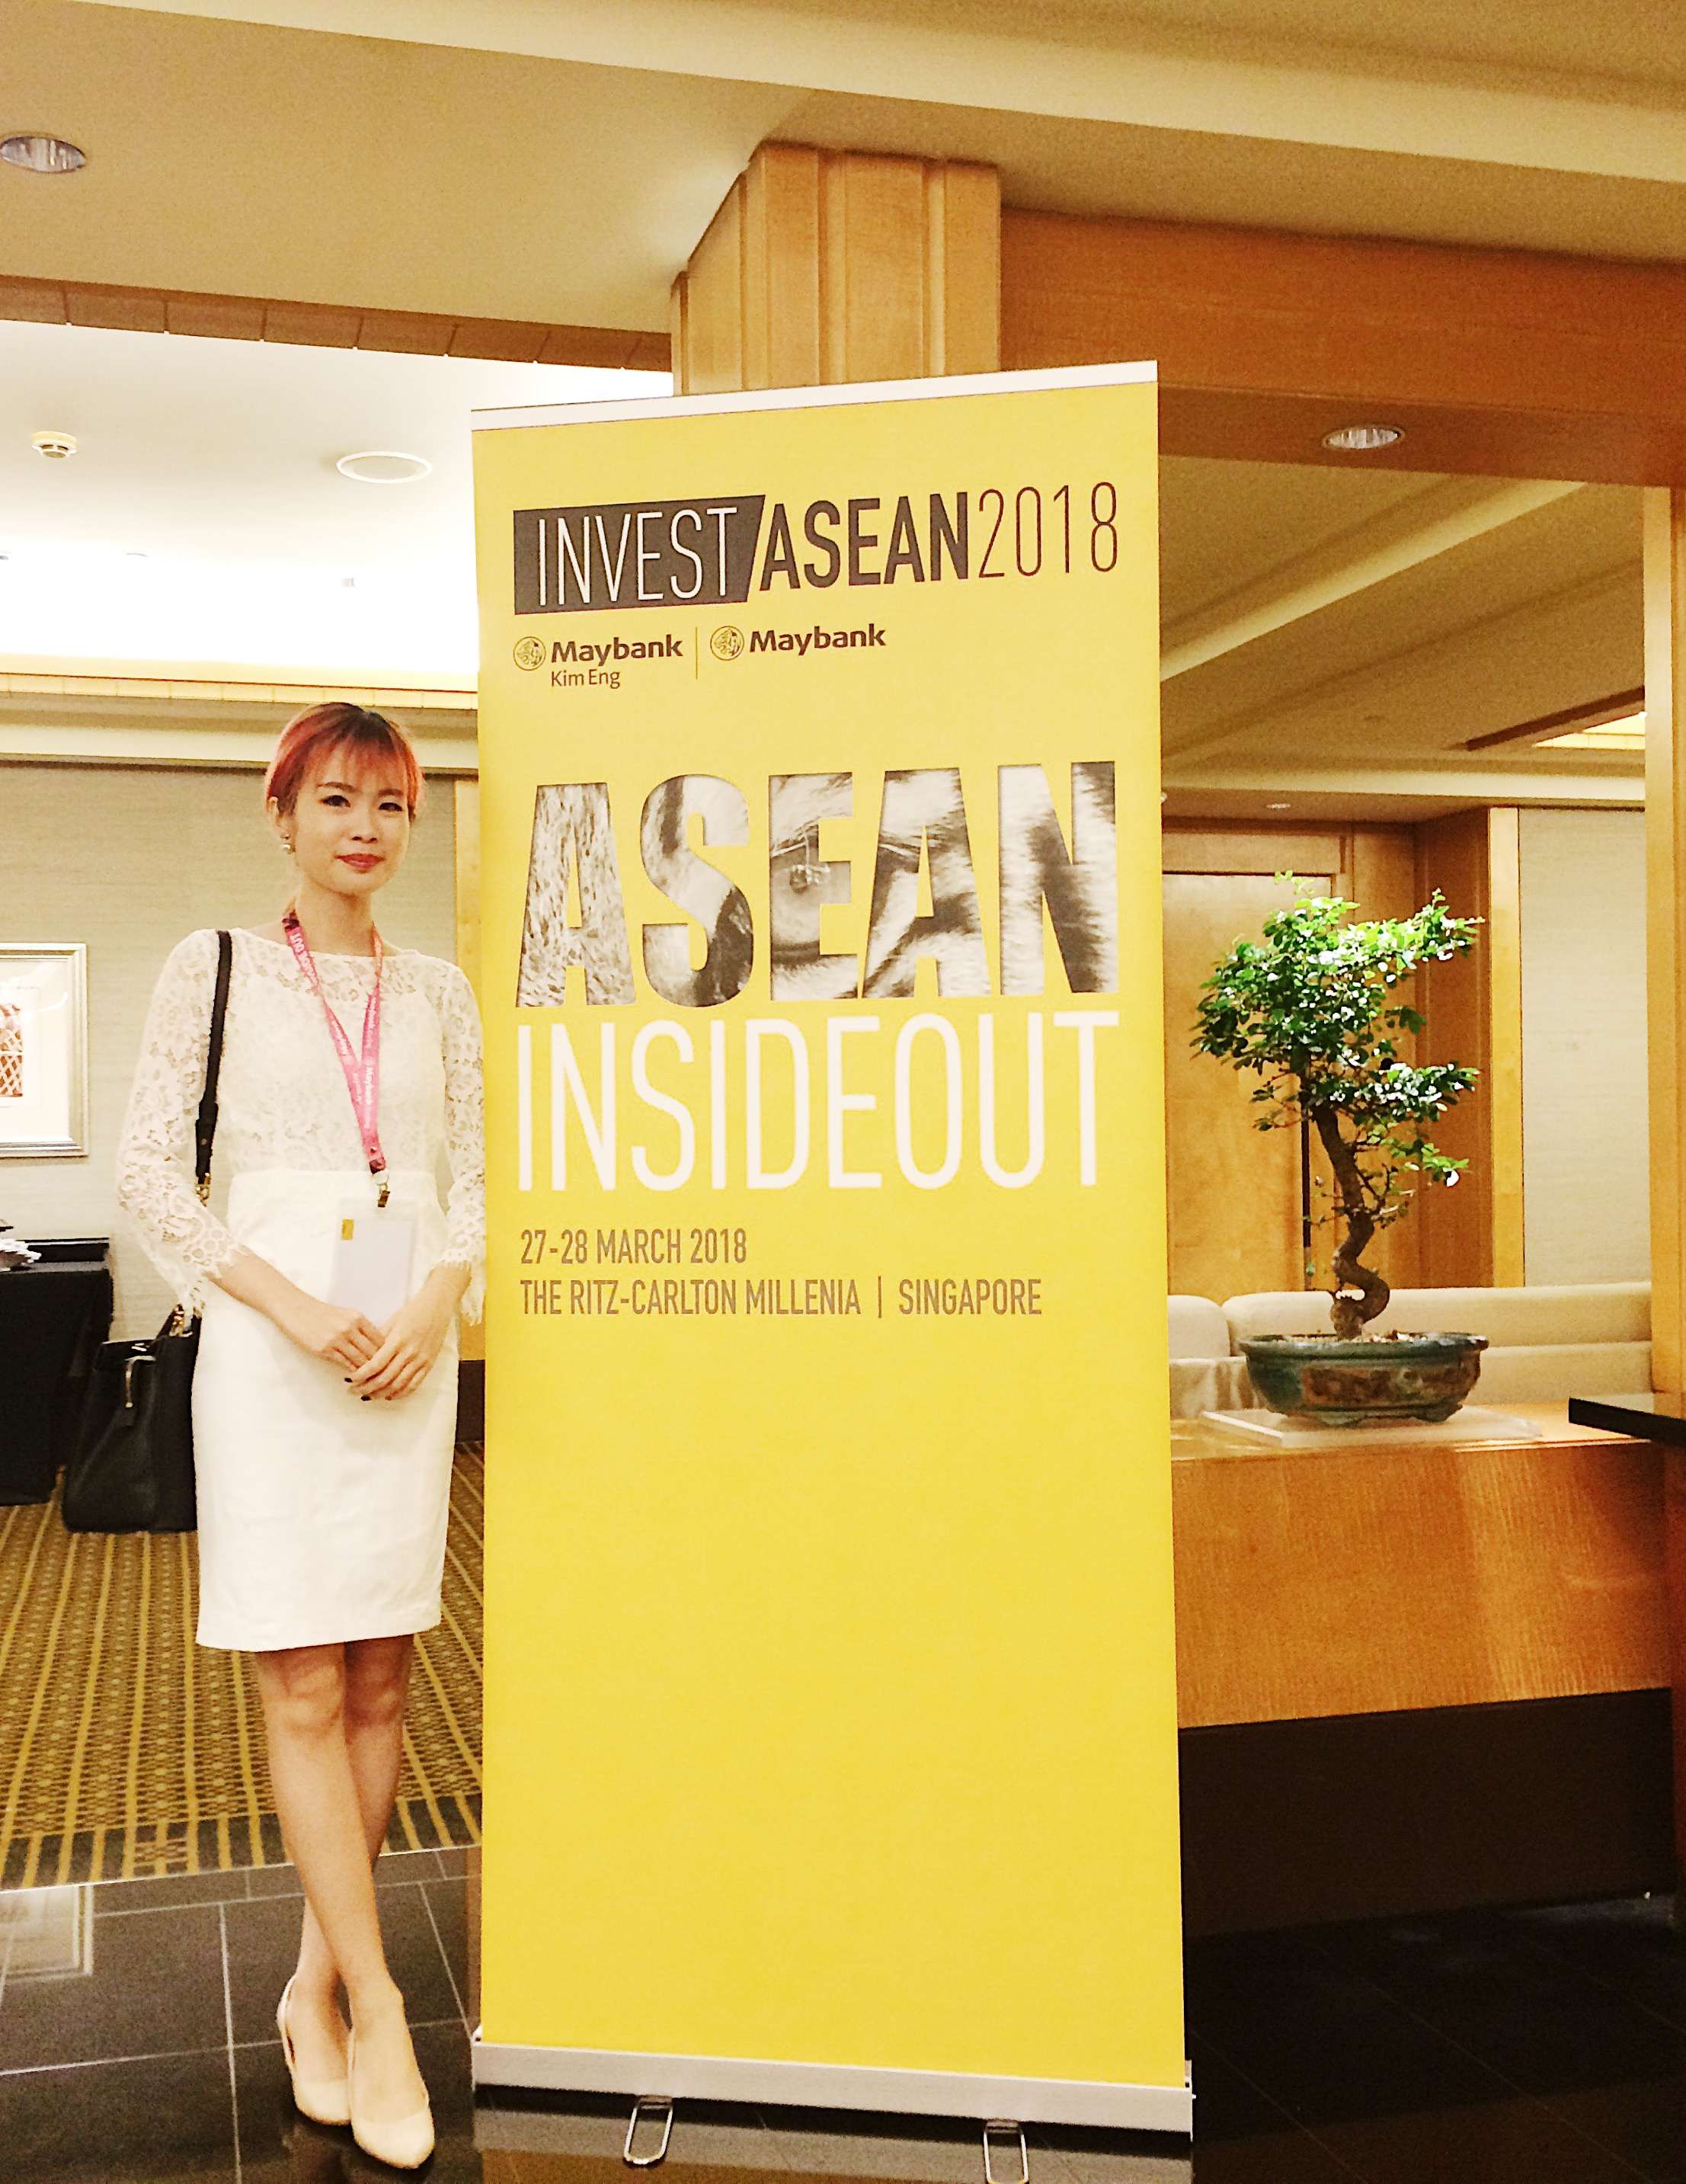 Nam Phuong at the Invest ASEAN Conference 2018 in Singapore, held by Maybank Kim Eng Securities for 700 investors and businesses from Southeast Asia. She was there to cover the event for Vietnam Investment Review.